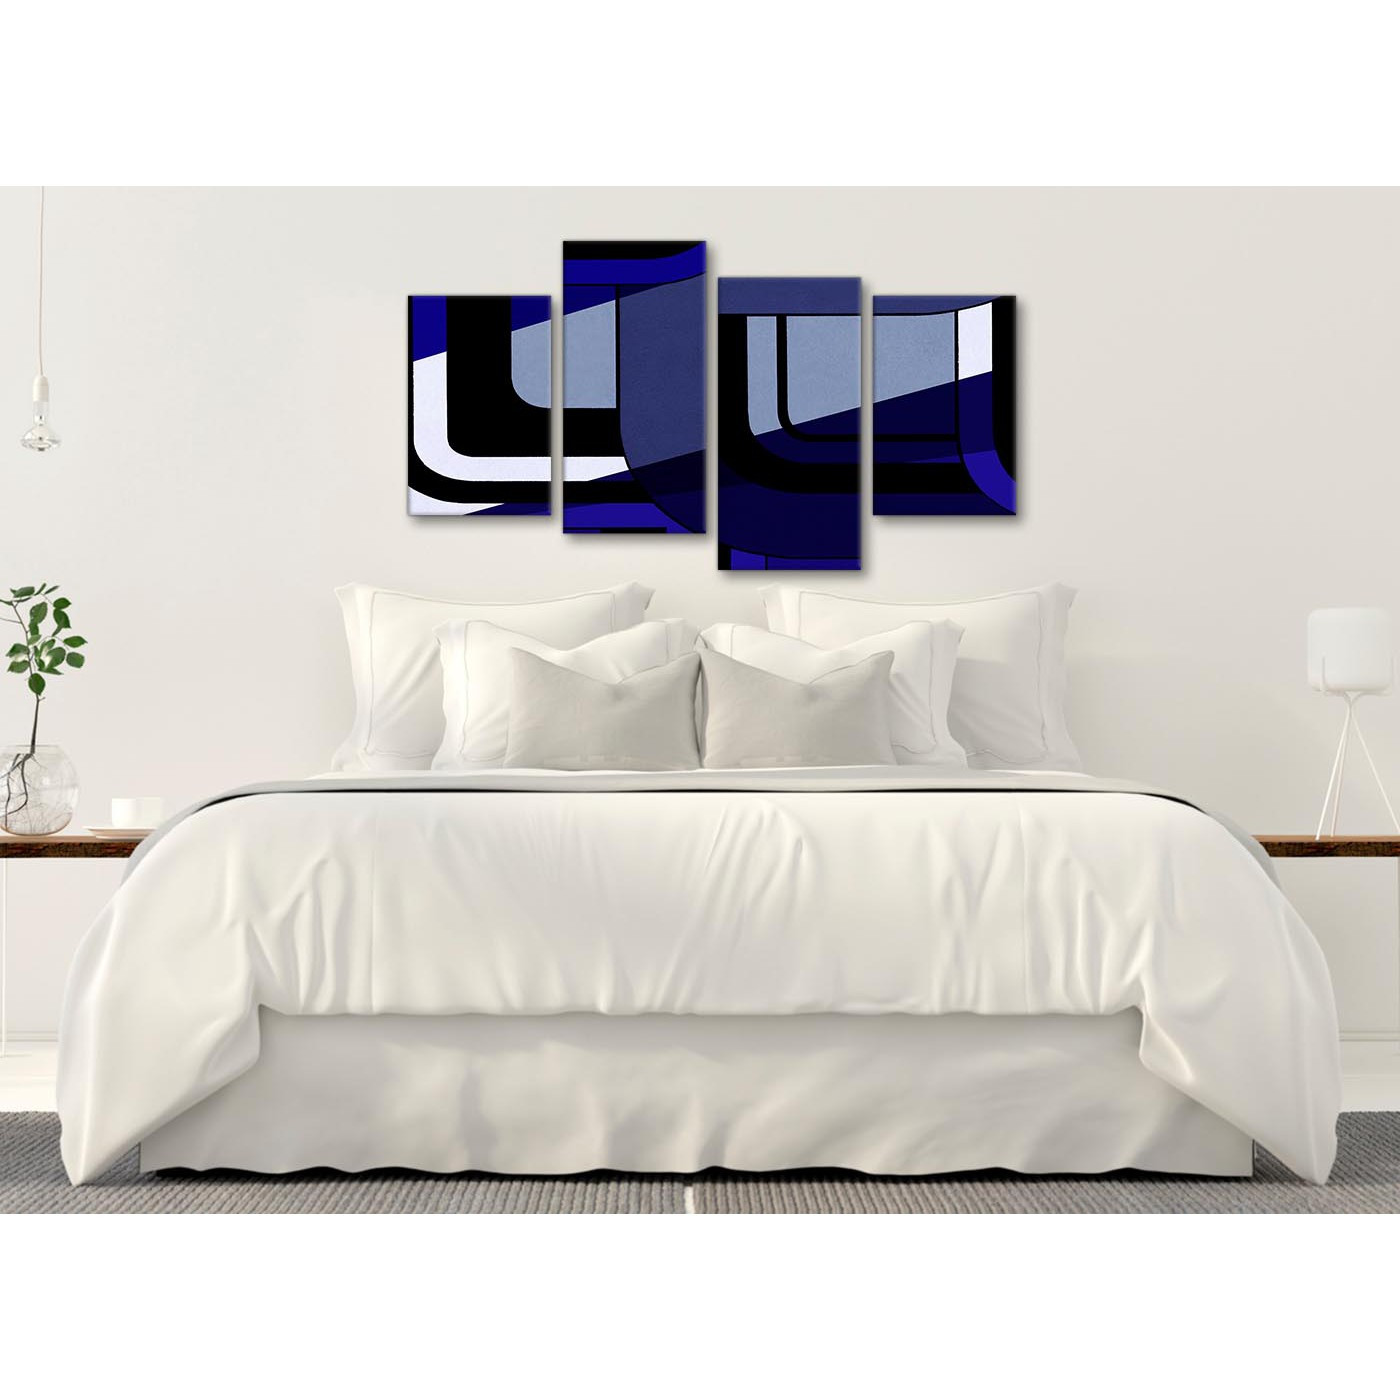 Blue Wall Art For Bedroom
 Indigo Navy Blue Painting Abstract Bedroom Canvas